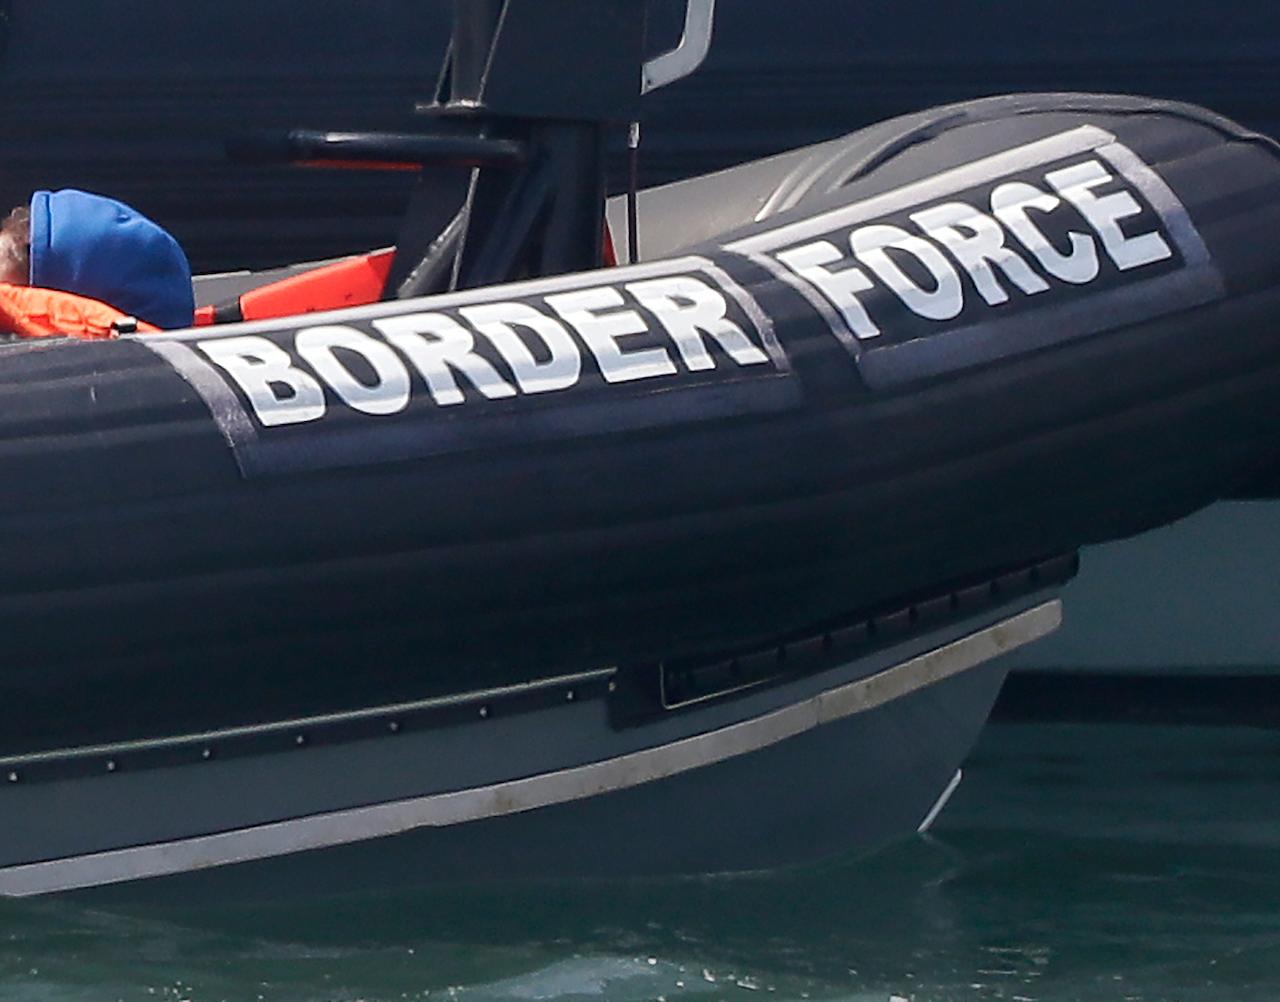 A Border Force vessel at the port city of Dover, England, in this Aug 8, 2020 file photo. Photo: AP